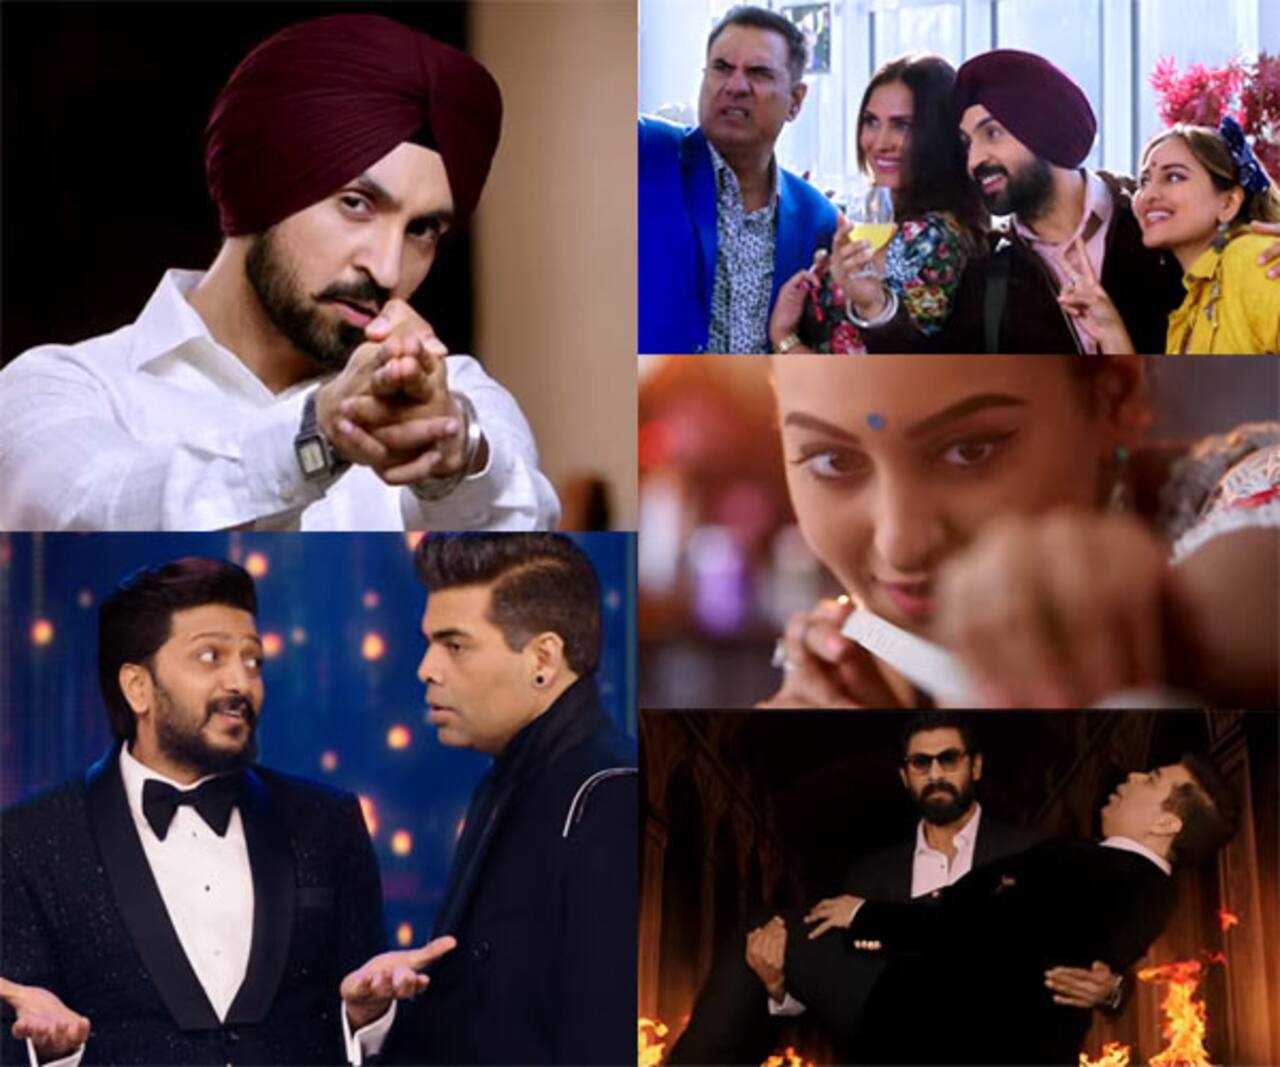 Welcome To New York Trailer: Karan Johar, Sonakshi Sinha and Diljit Dosanjh  take you on a laughter riot - watch video - Bollywood News & Gossip, Movie  Reviews, Trailers & Videos at